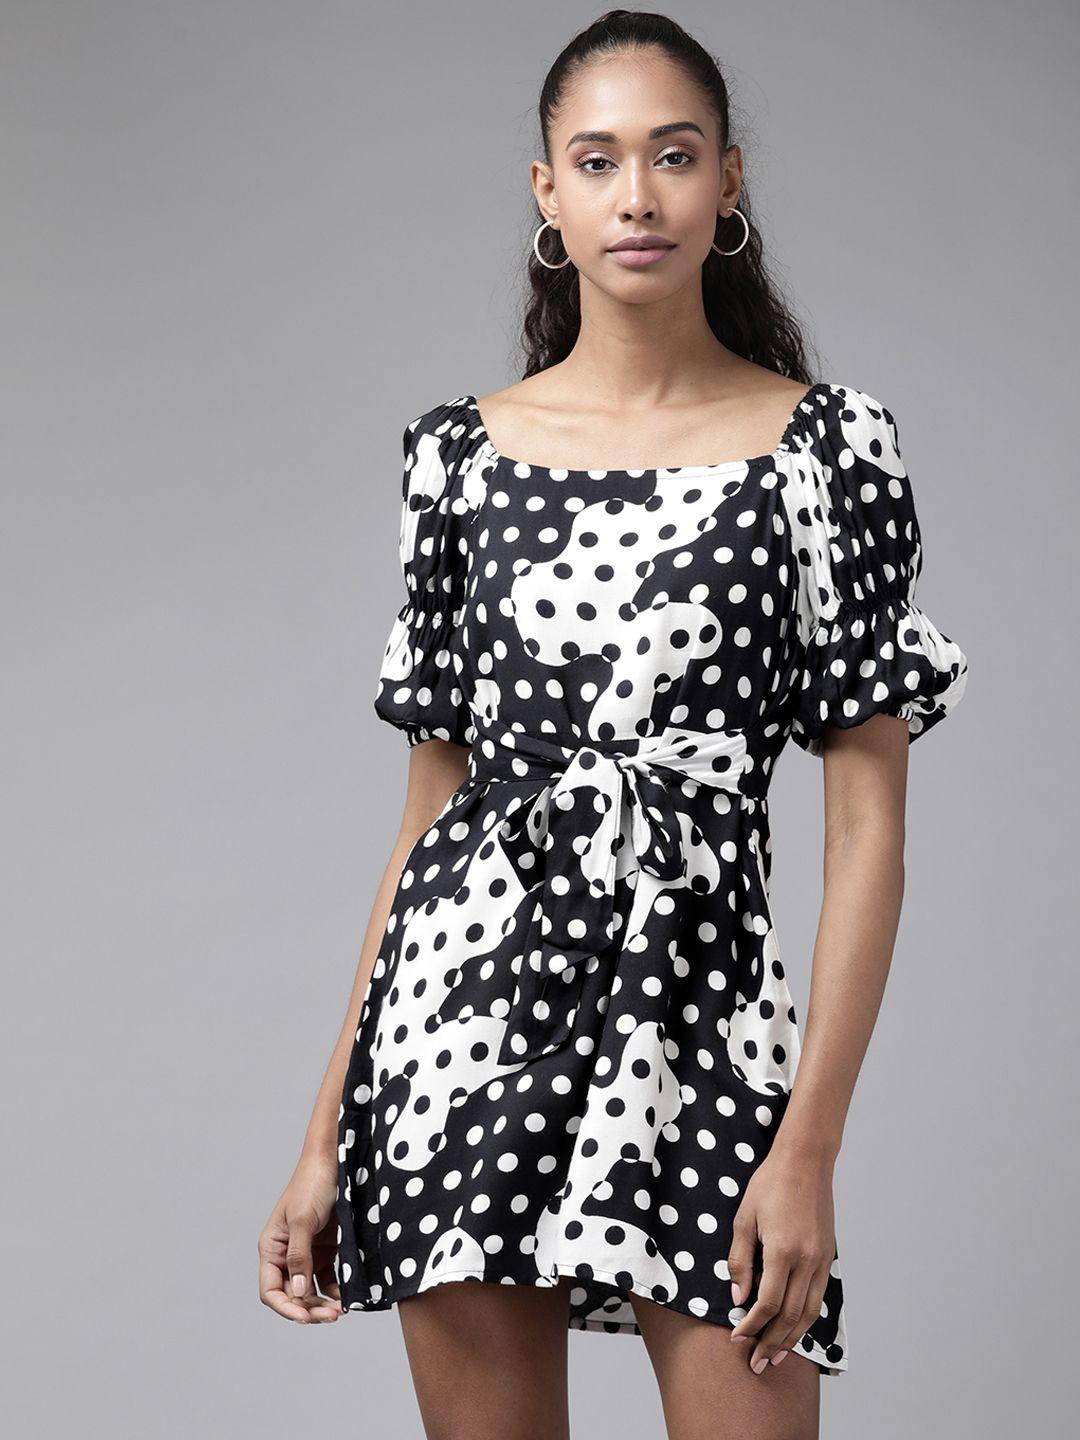 the dry state black & white printed mini fit & flare dress